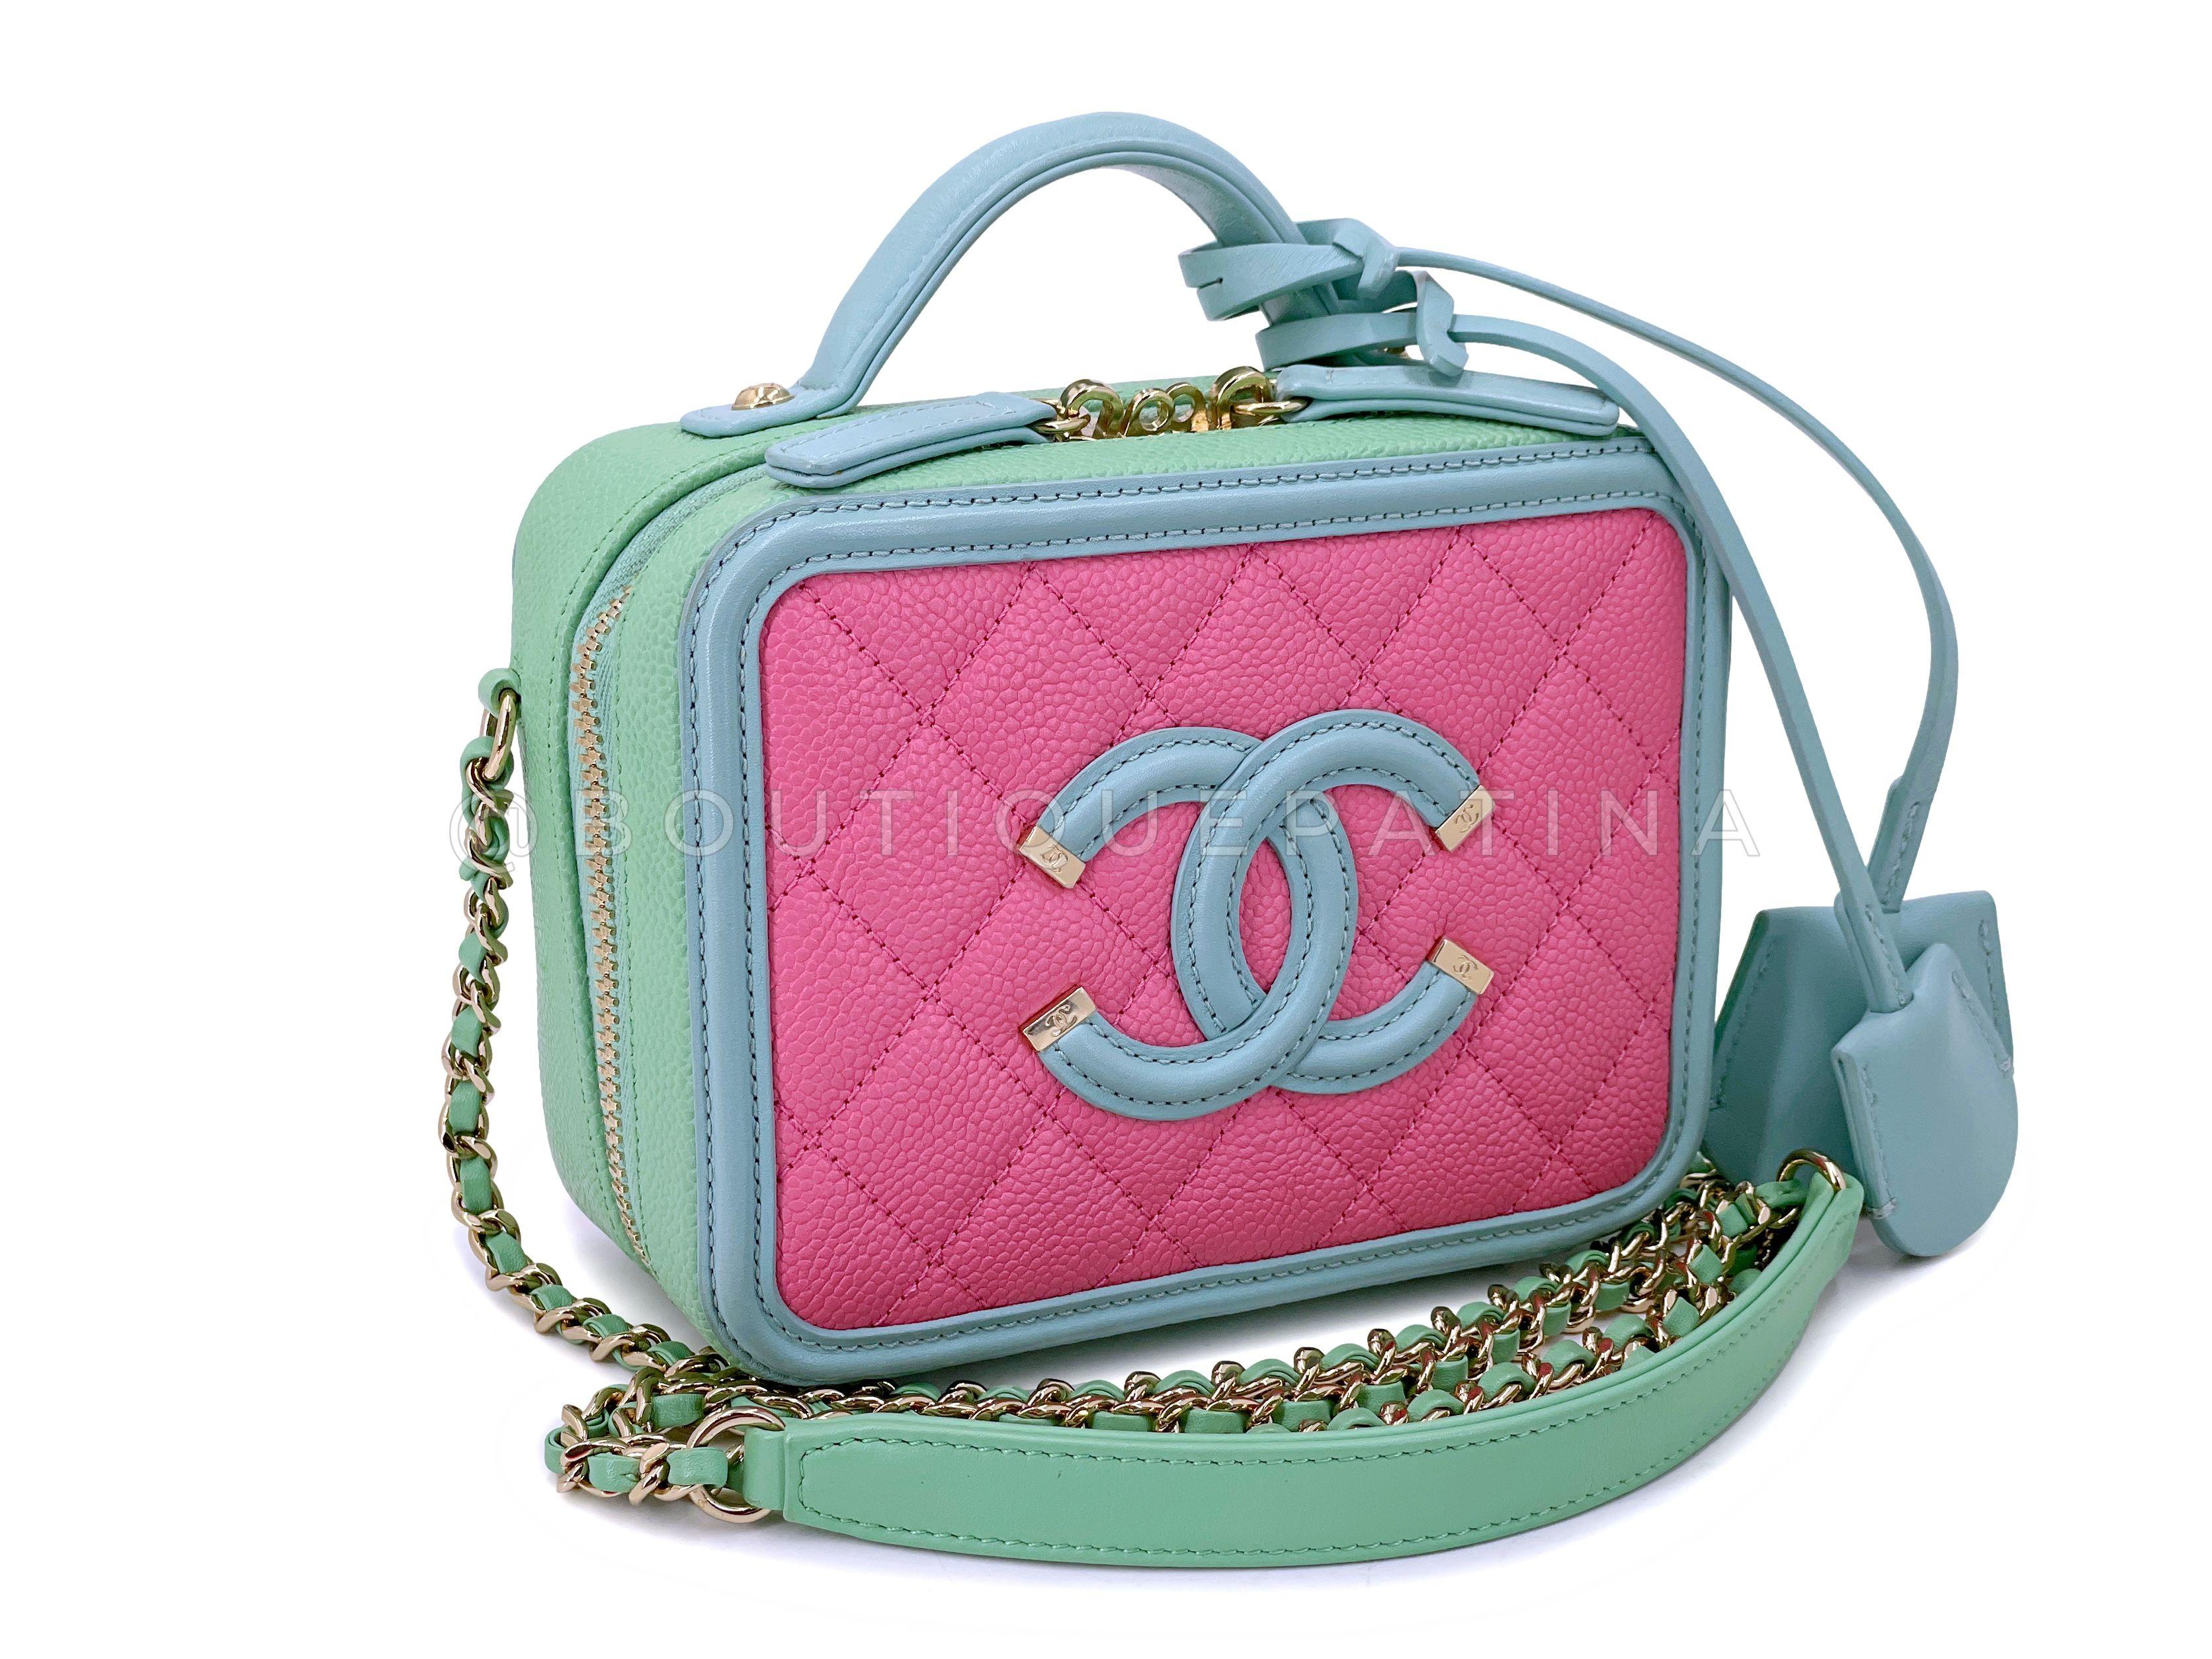 Chanel Caviar Quilted Filigree Vanity Clutch with Chain Pink Light Blue Green